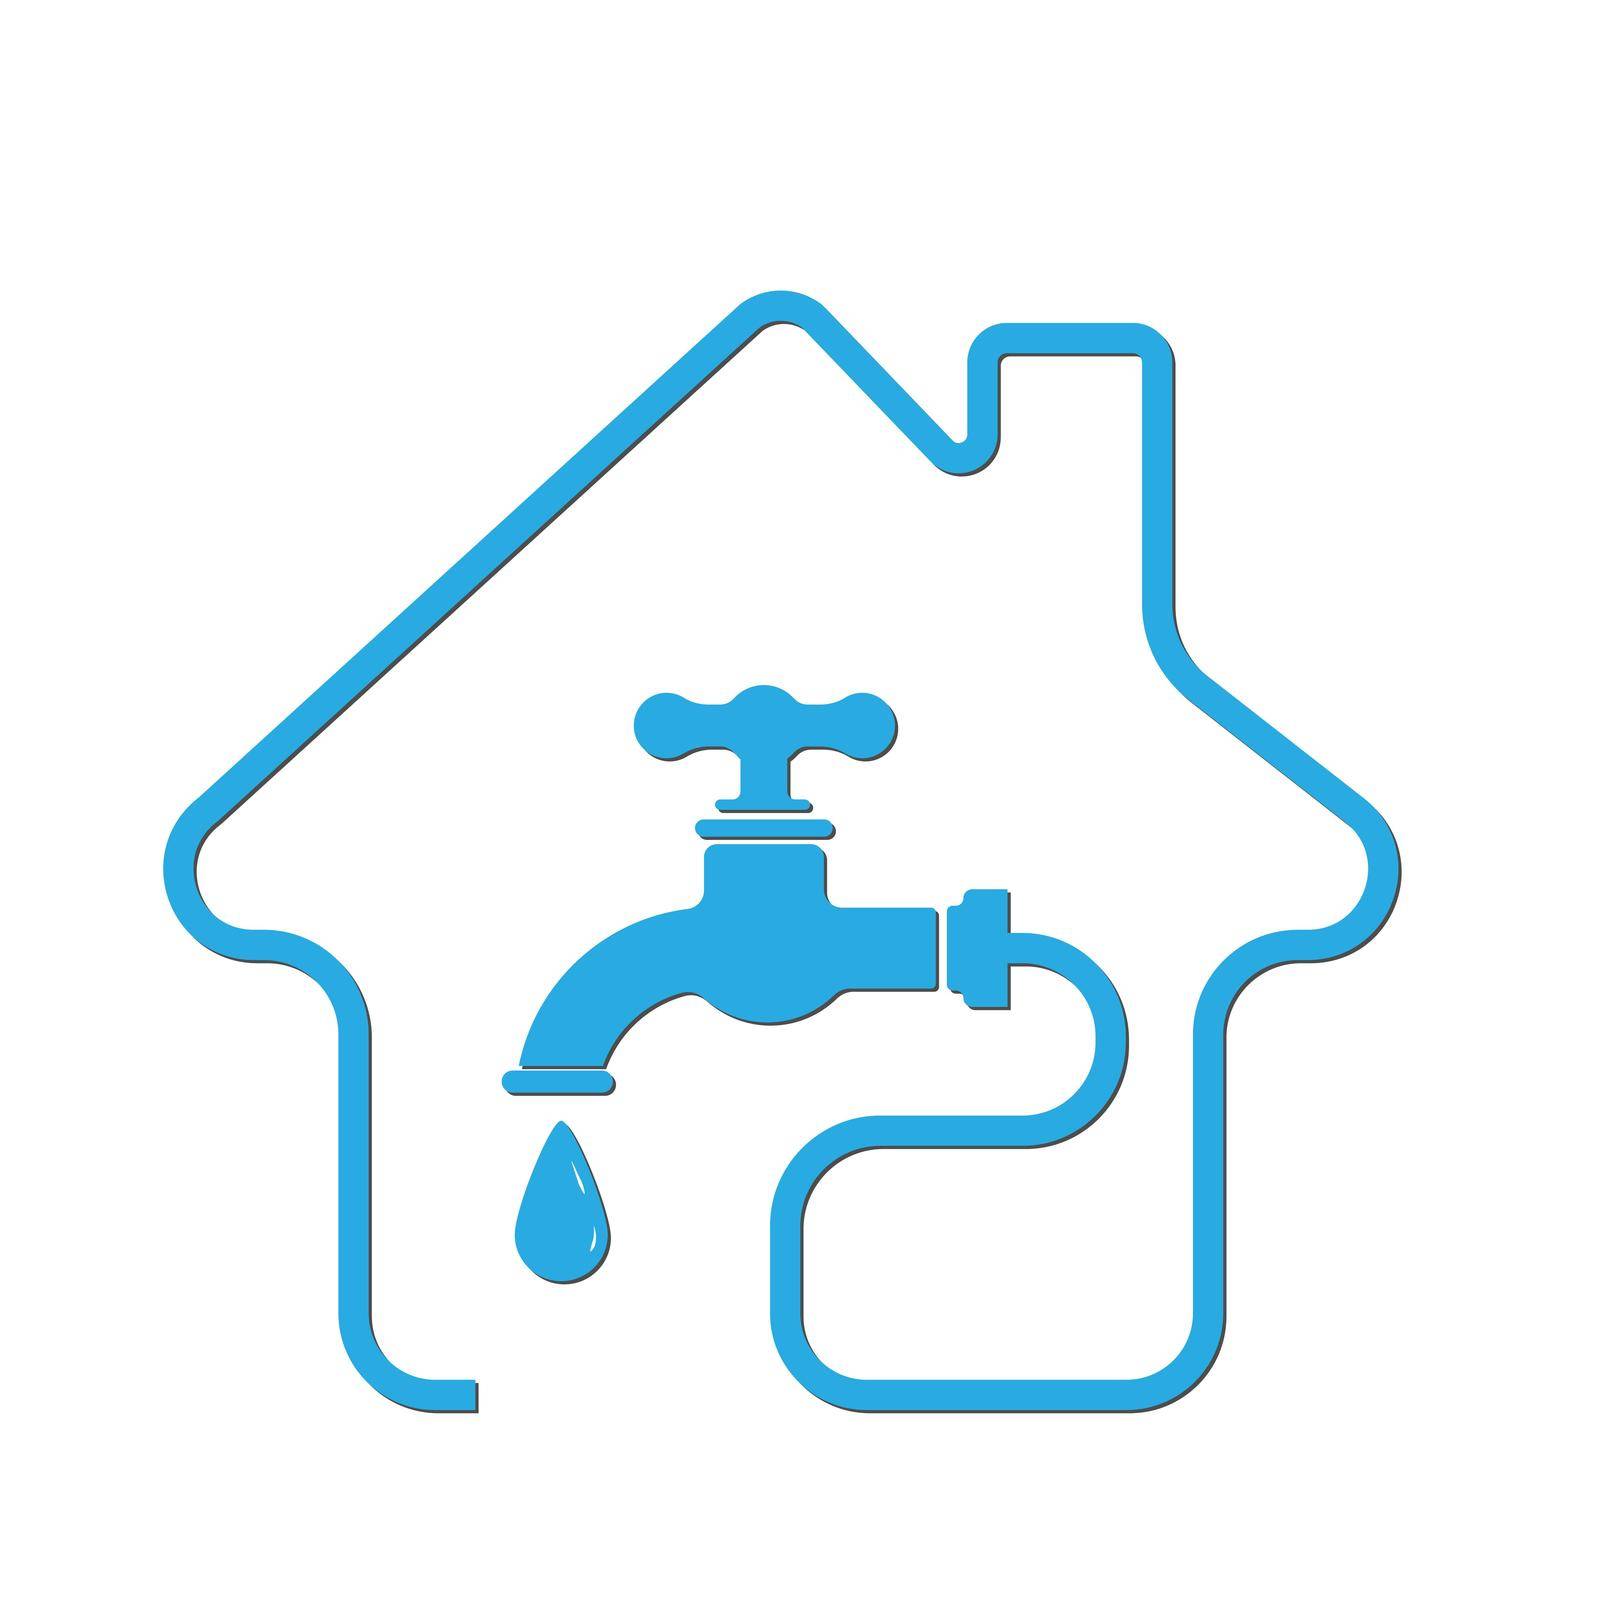 Water supply, utility icon. Vector stock illustration, flat style